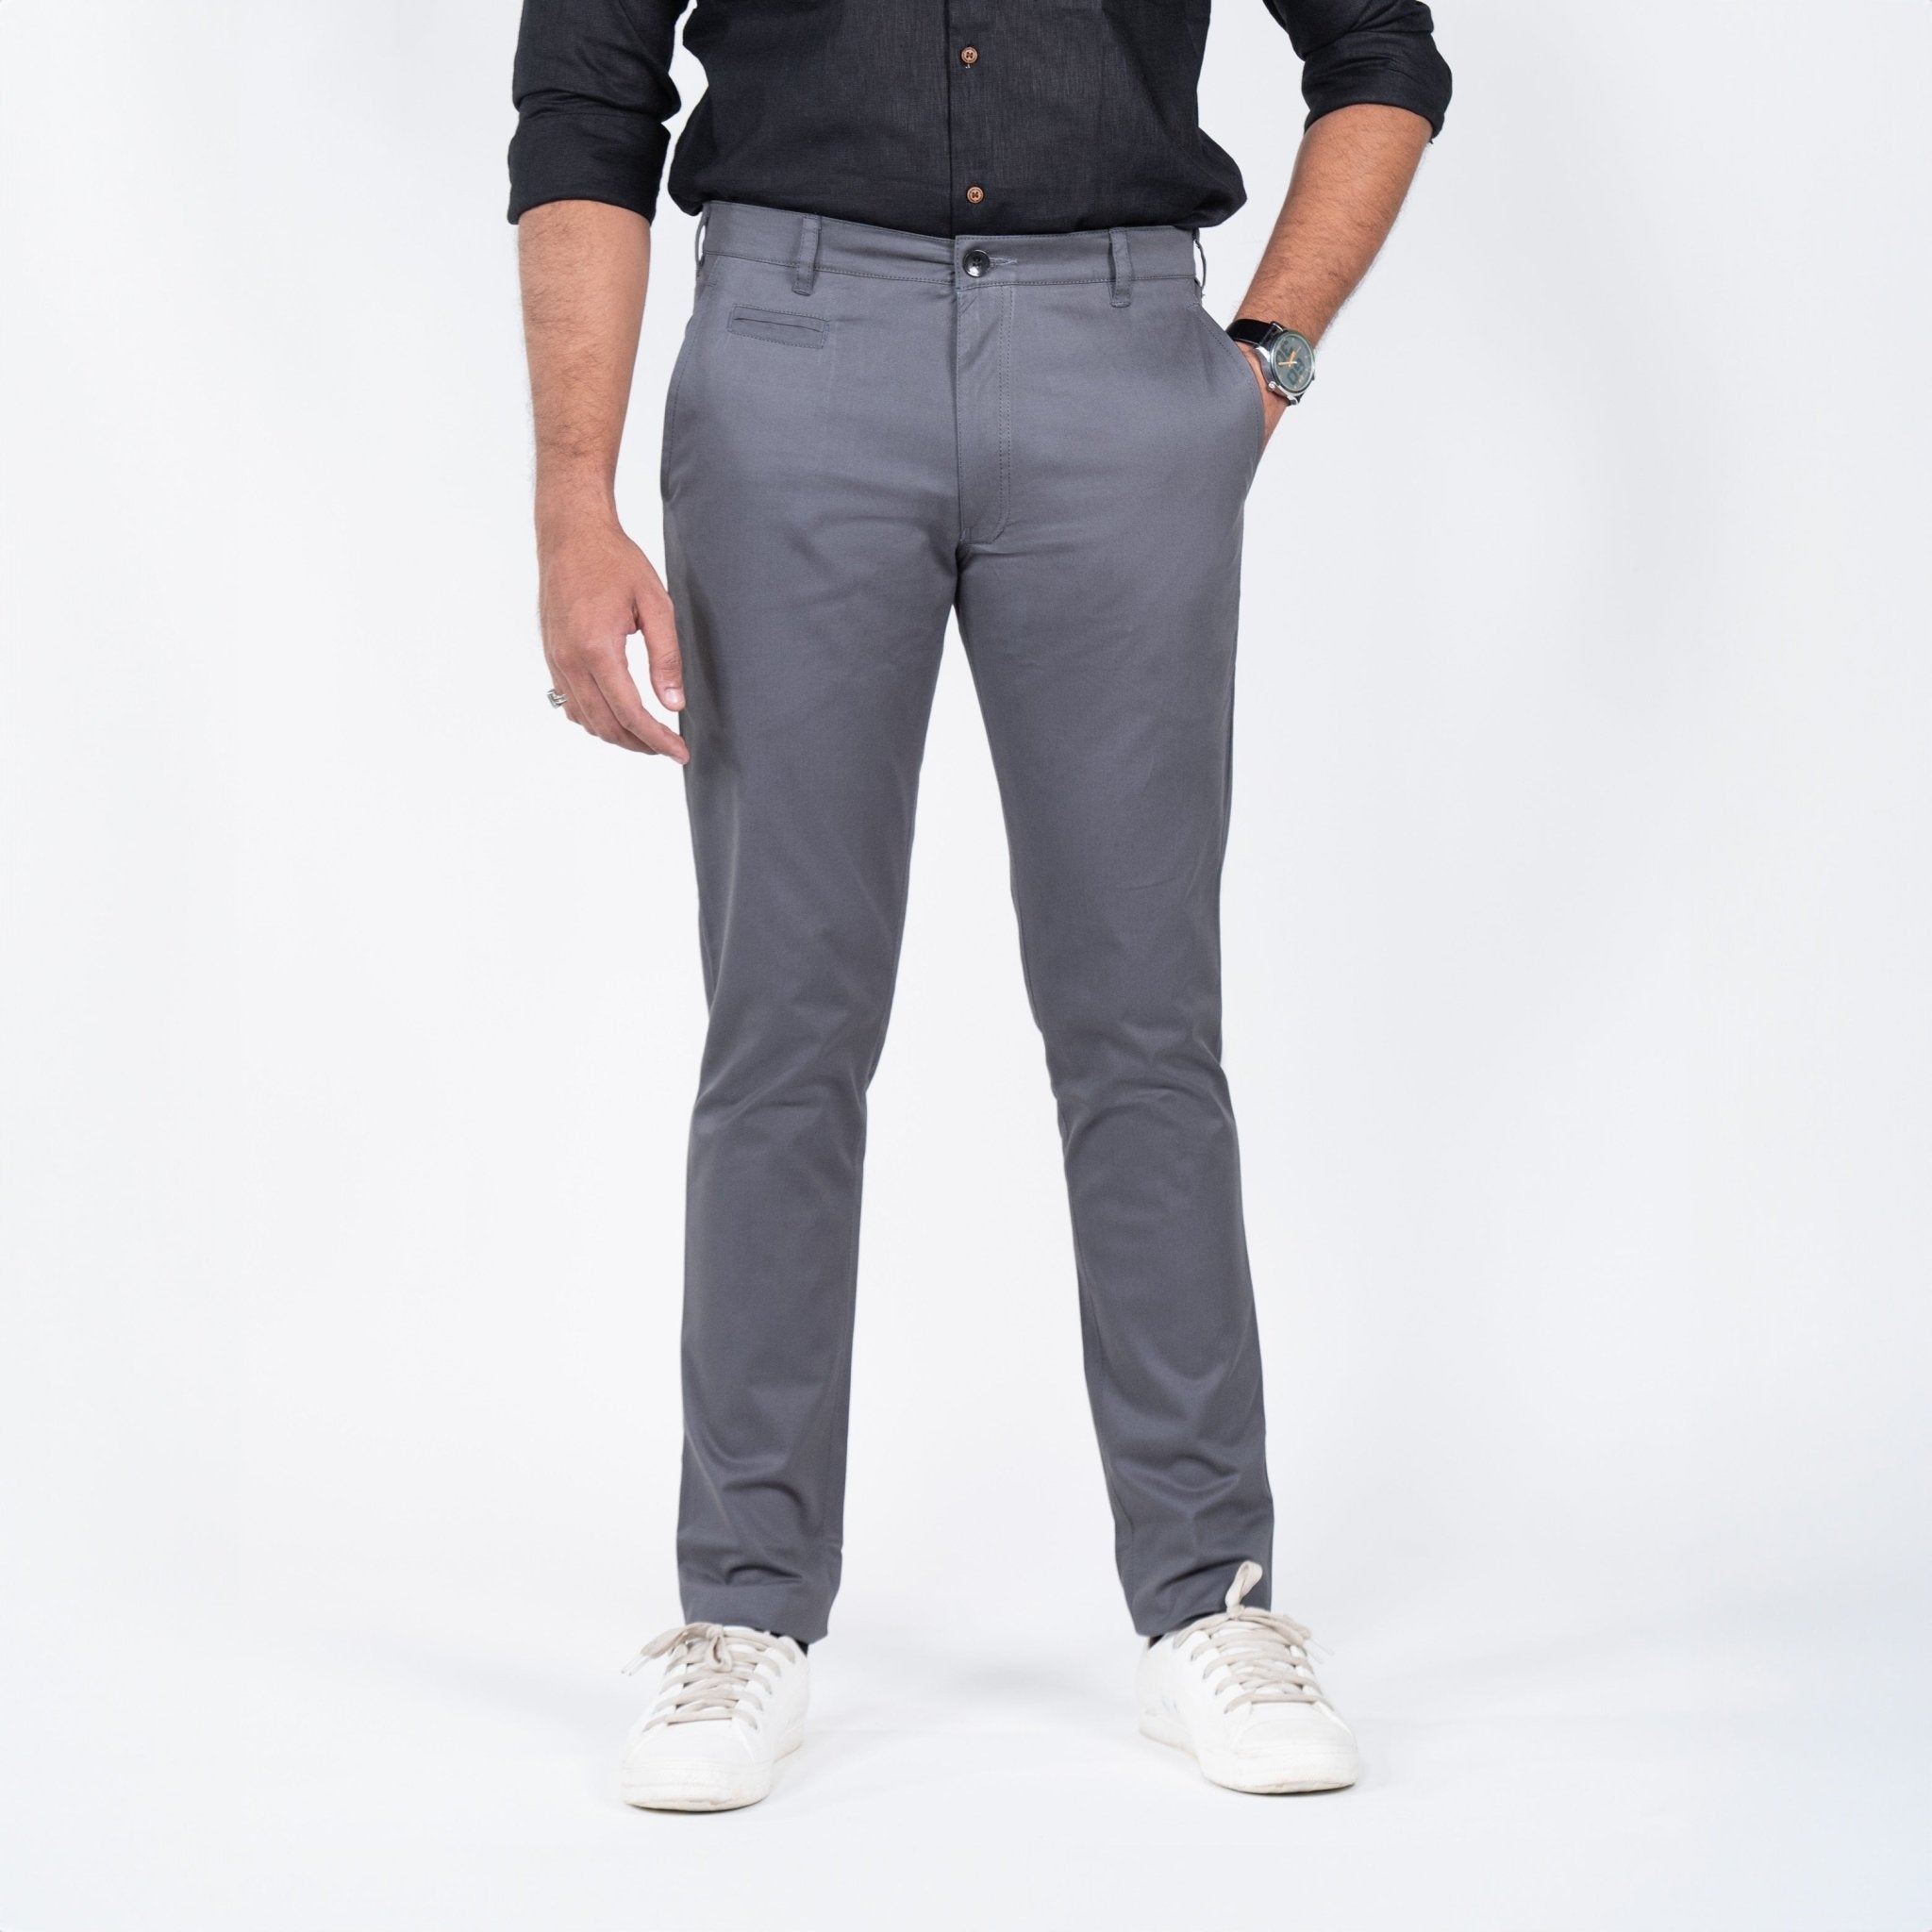 Trouser Pants - Buy Latest Collection Of Pants For Men Online 2024